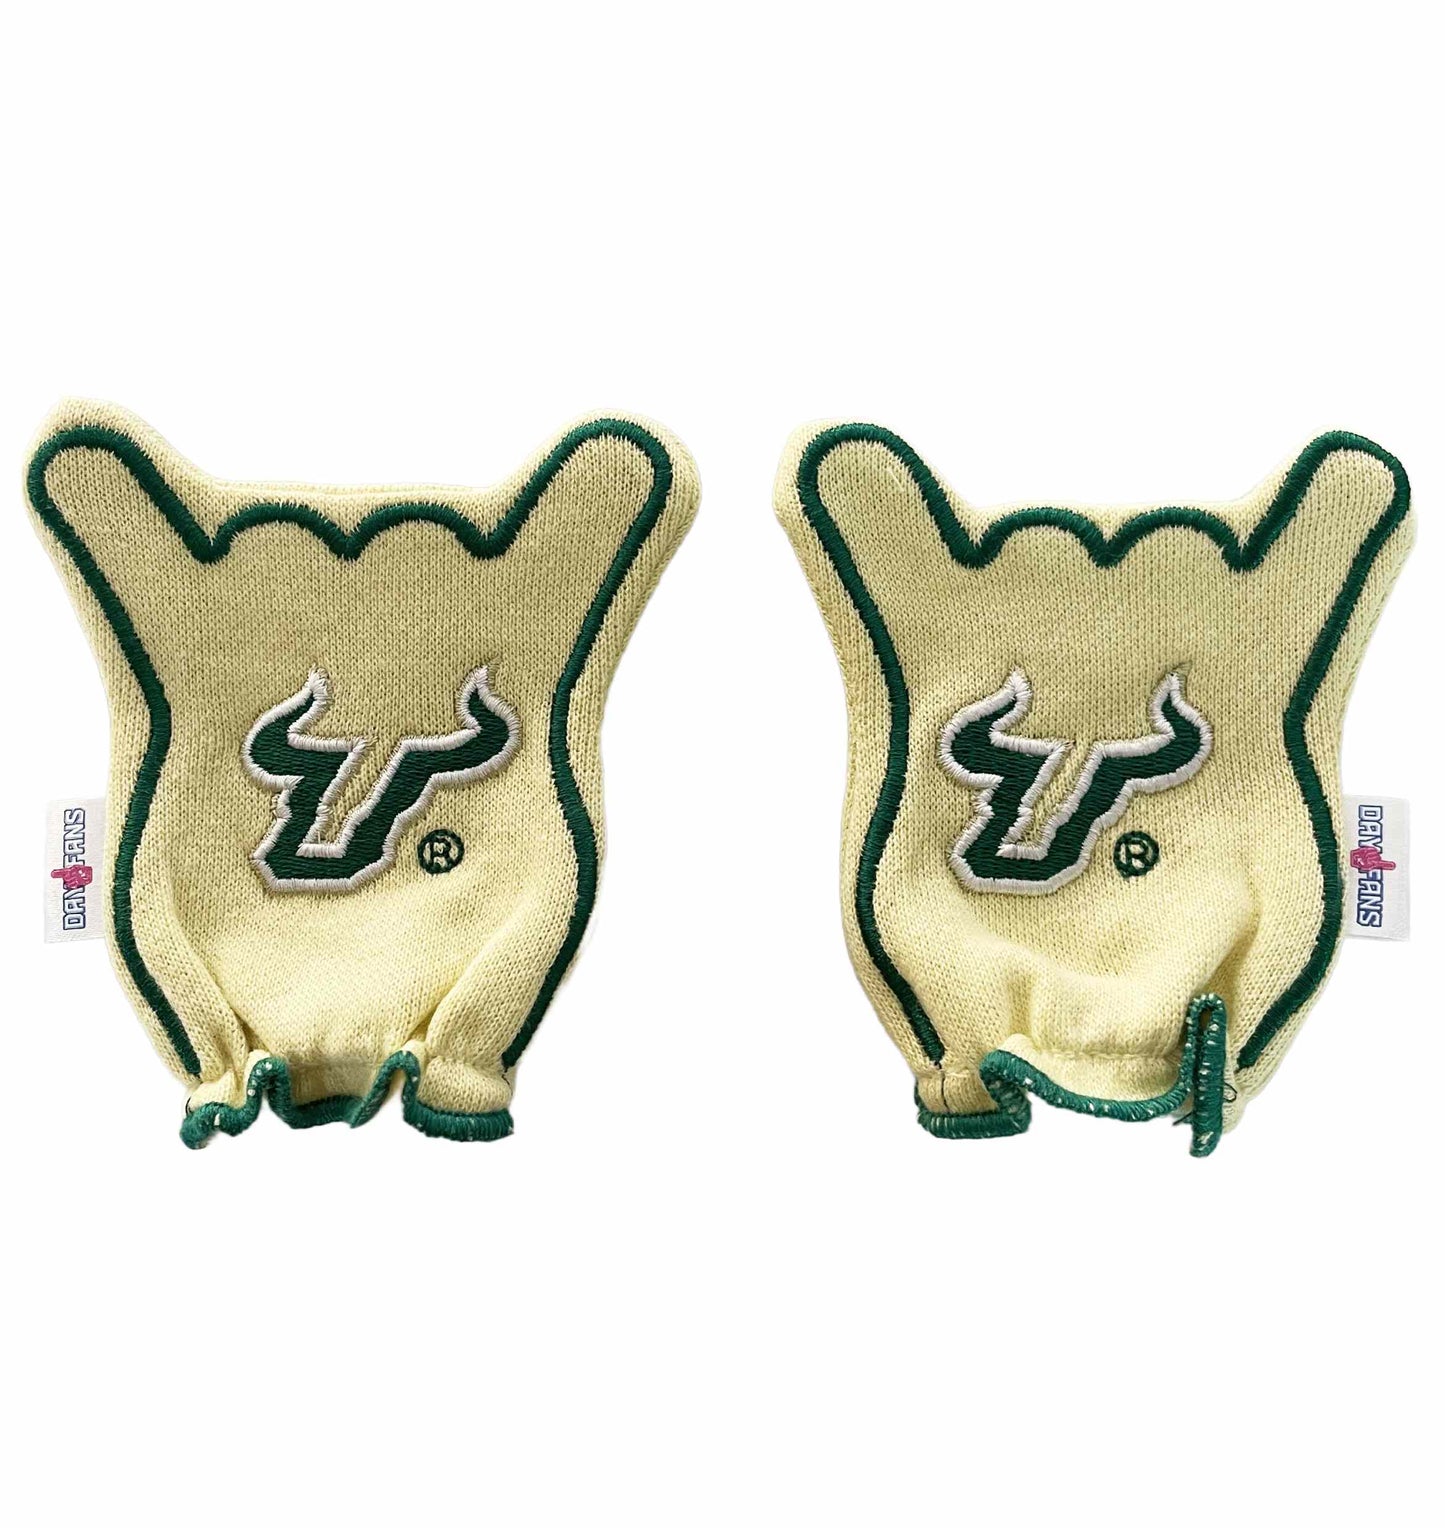 USF Go Bulls FanMitts Baby Mittens Gold Back Pair